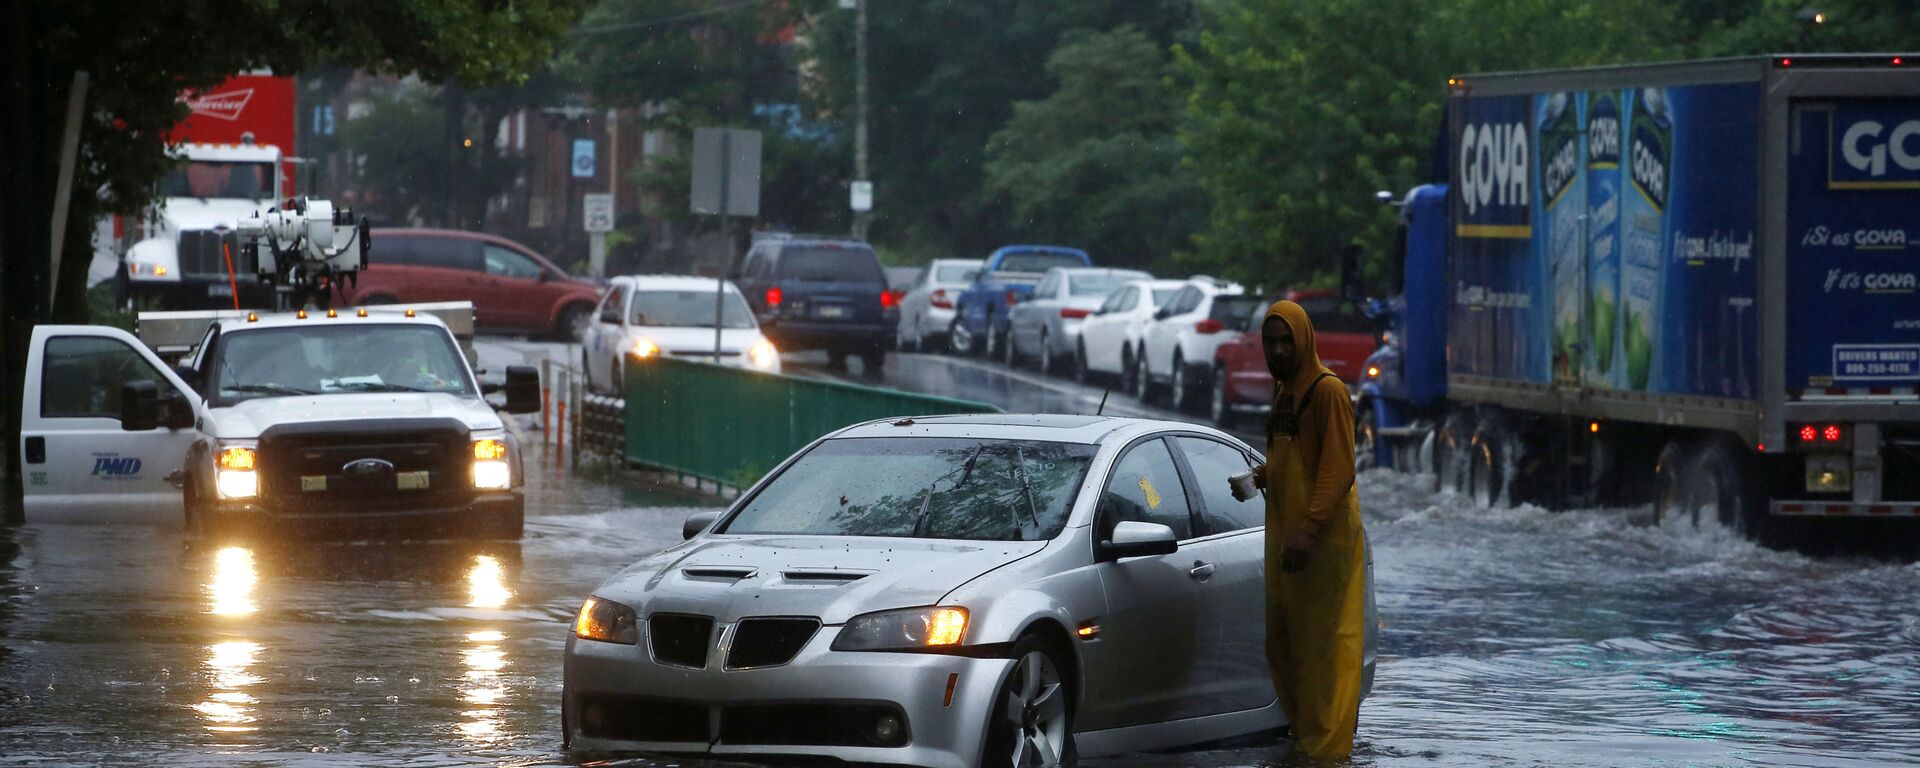 A man checks on a stranded vehicle during Tropical Storm Isaias, Tuesday, Aug. 4, 2020, in Philadelphia. The storm spawned tornadoes and dumped rain during an inland march up the U.S. East Coast after making landfall as a hurricane along the North Carolina coast. (AP Photo/Matt Slocum) - Sputnik International, 1920, 24.09.2023